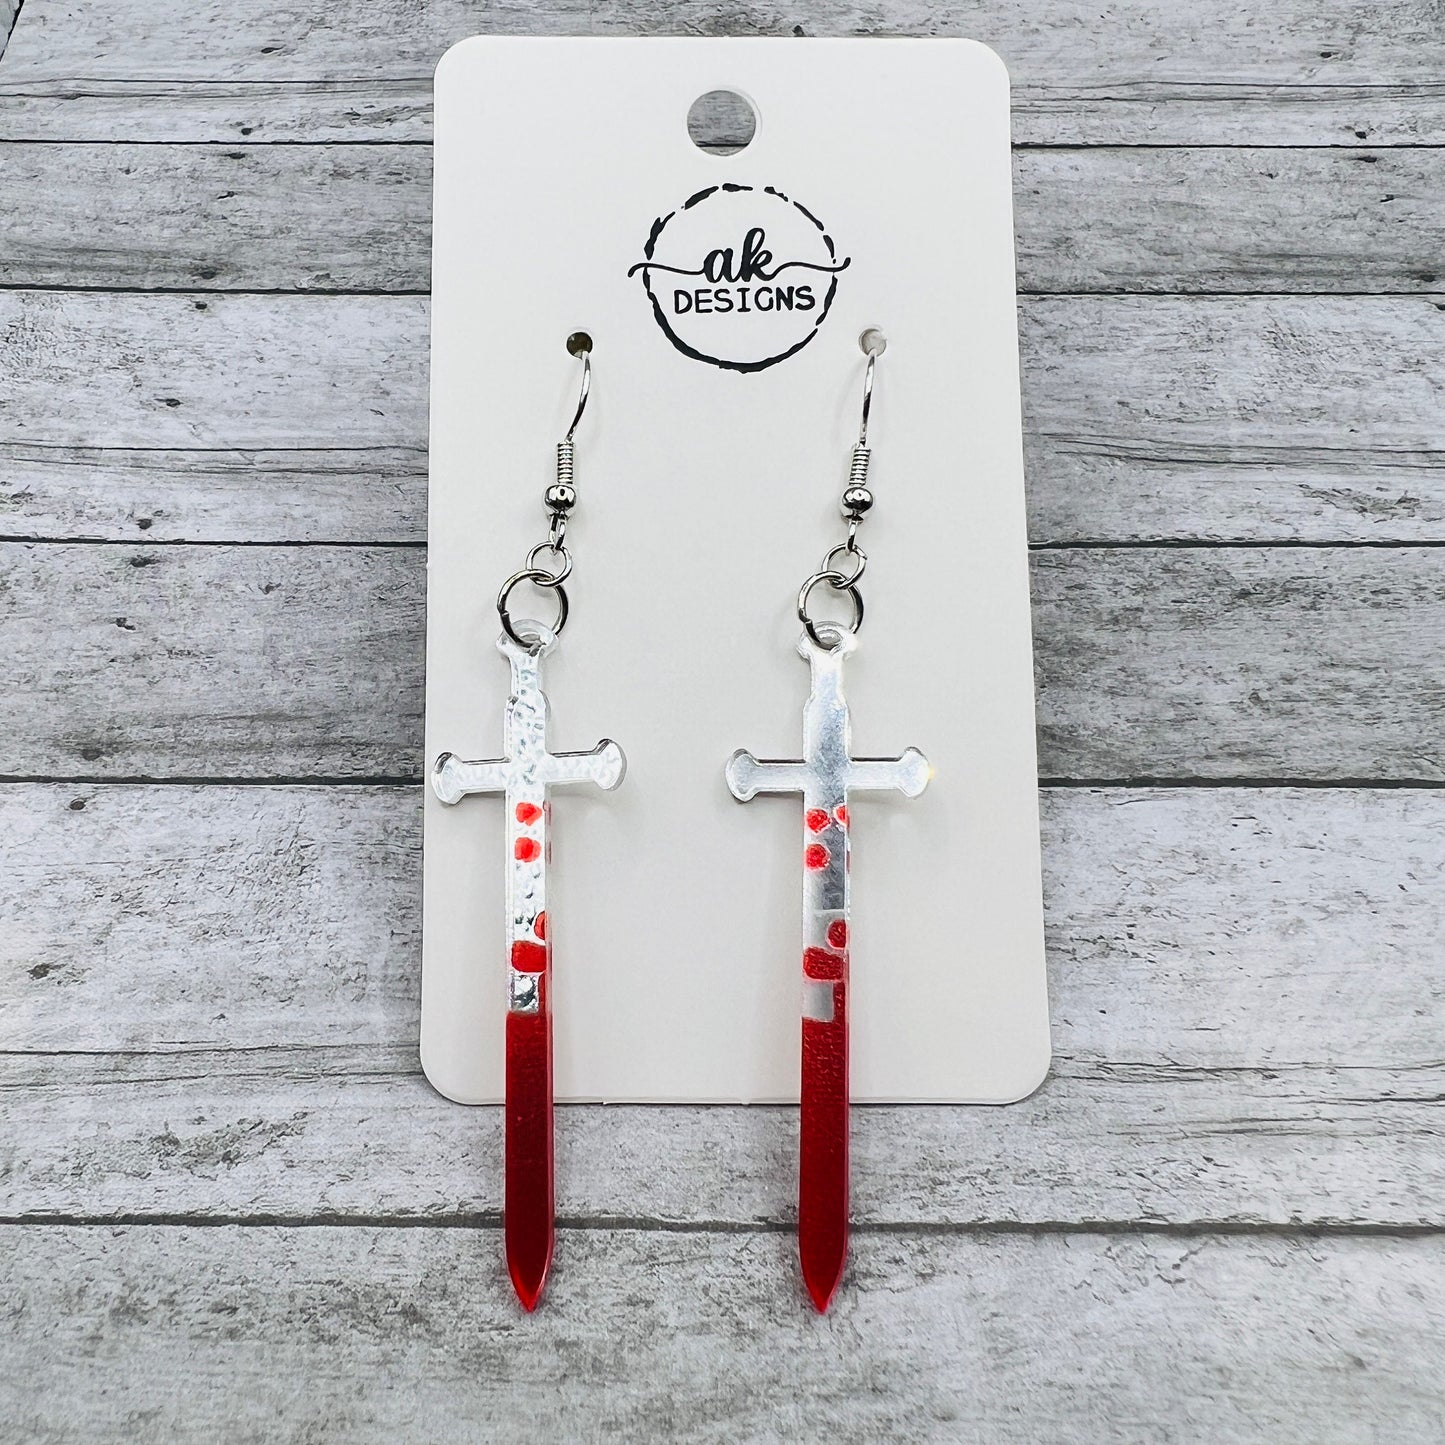 Blood Covered Bloody Sword Halloween Acrylic Earrings - Clearance